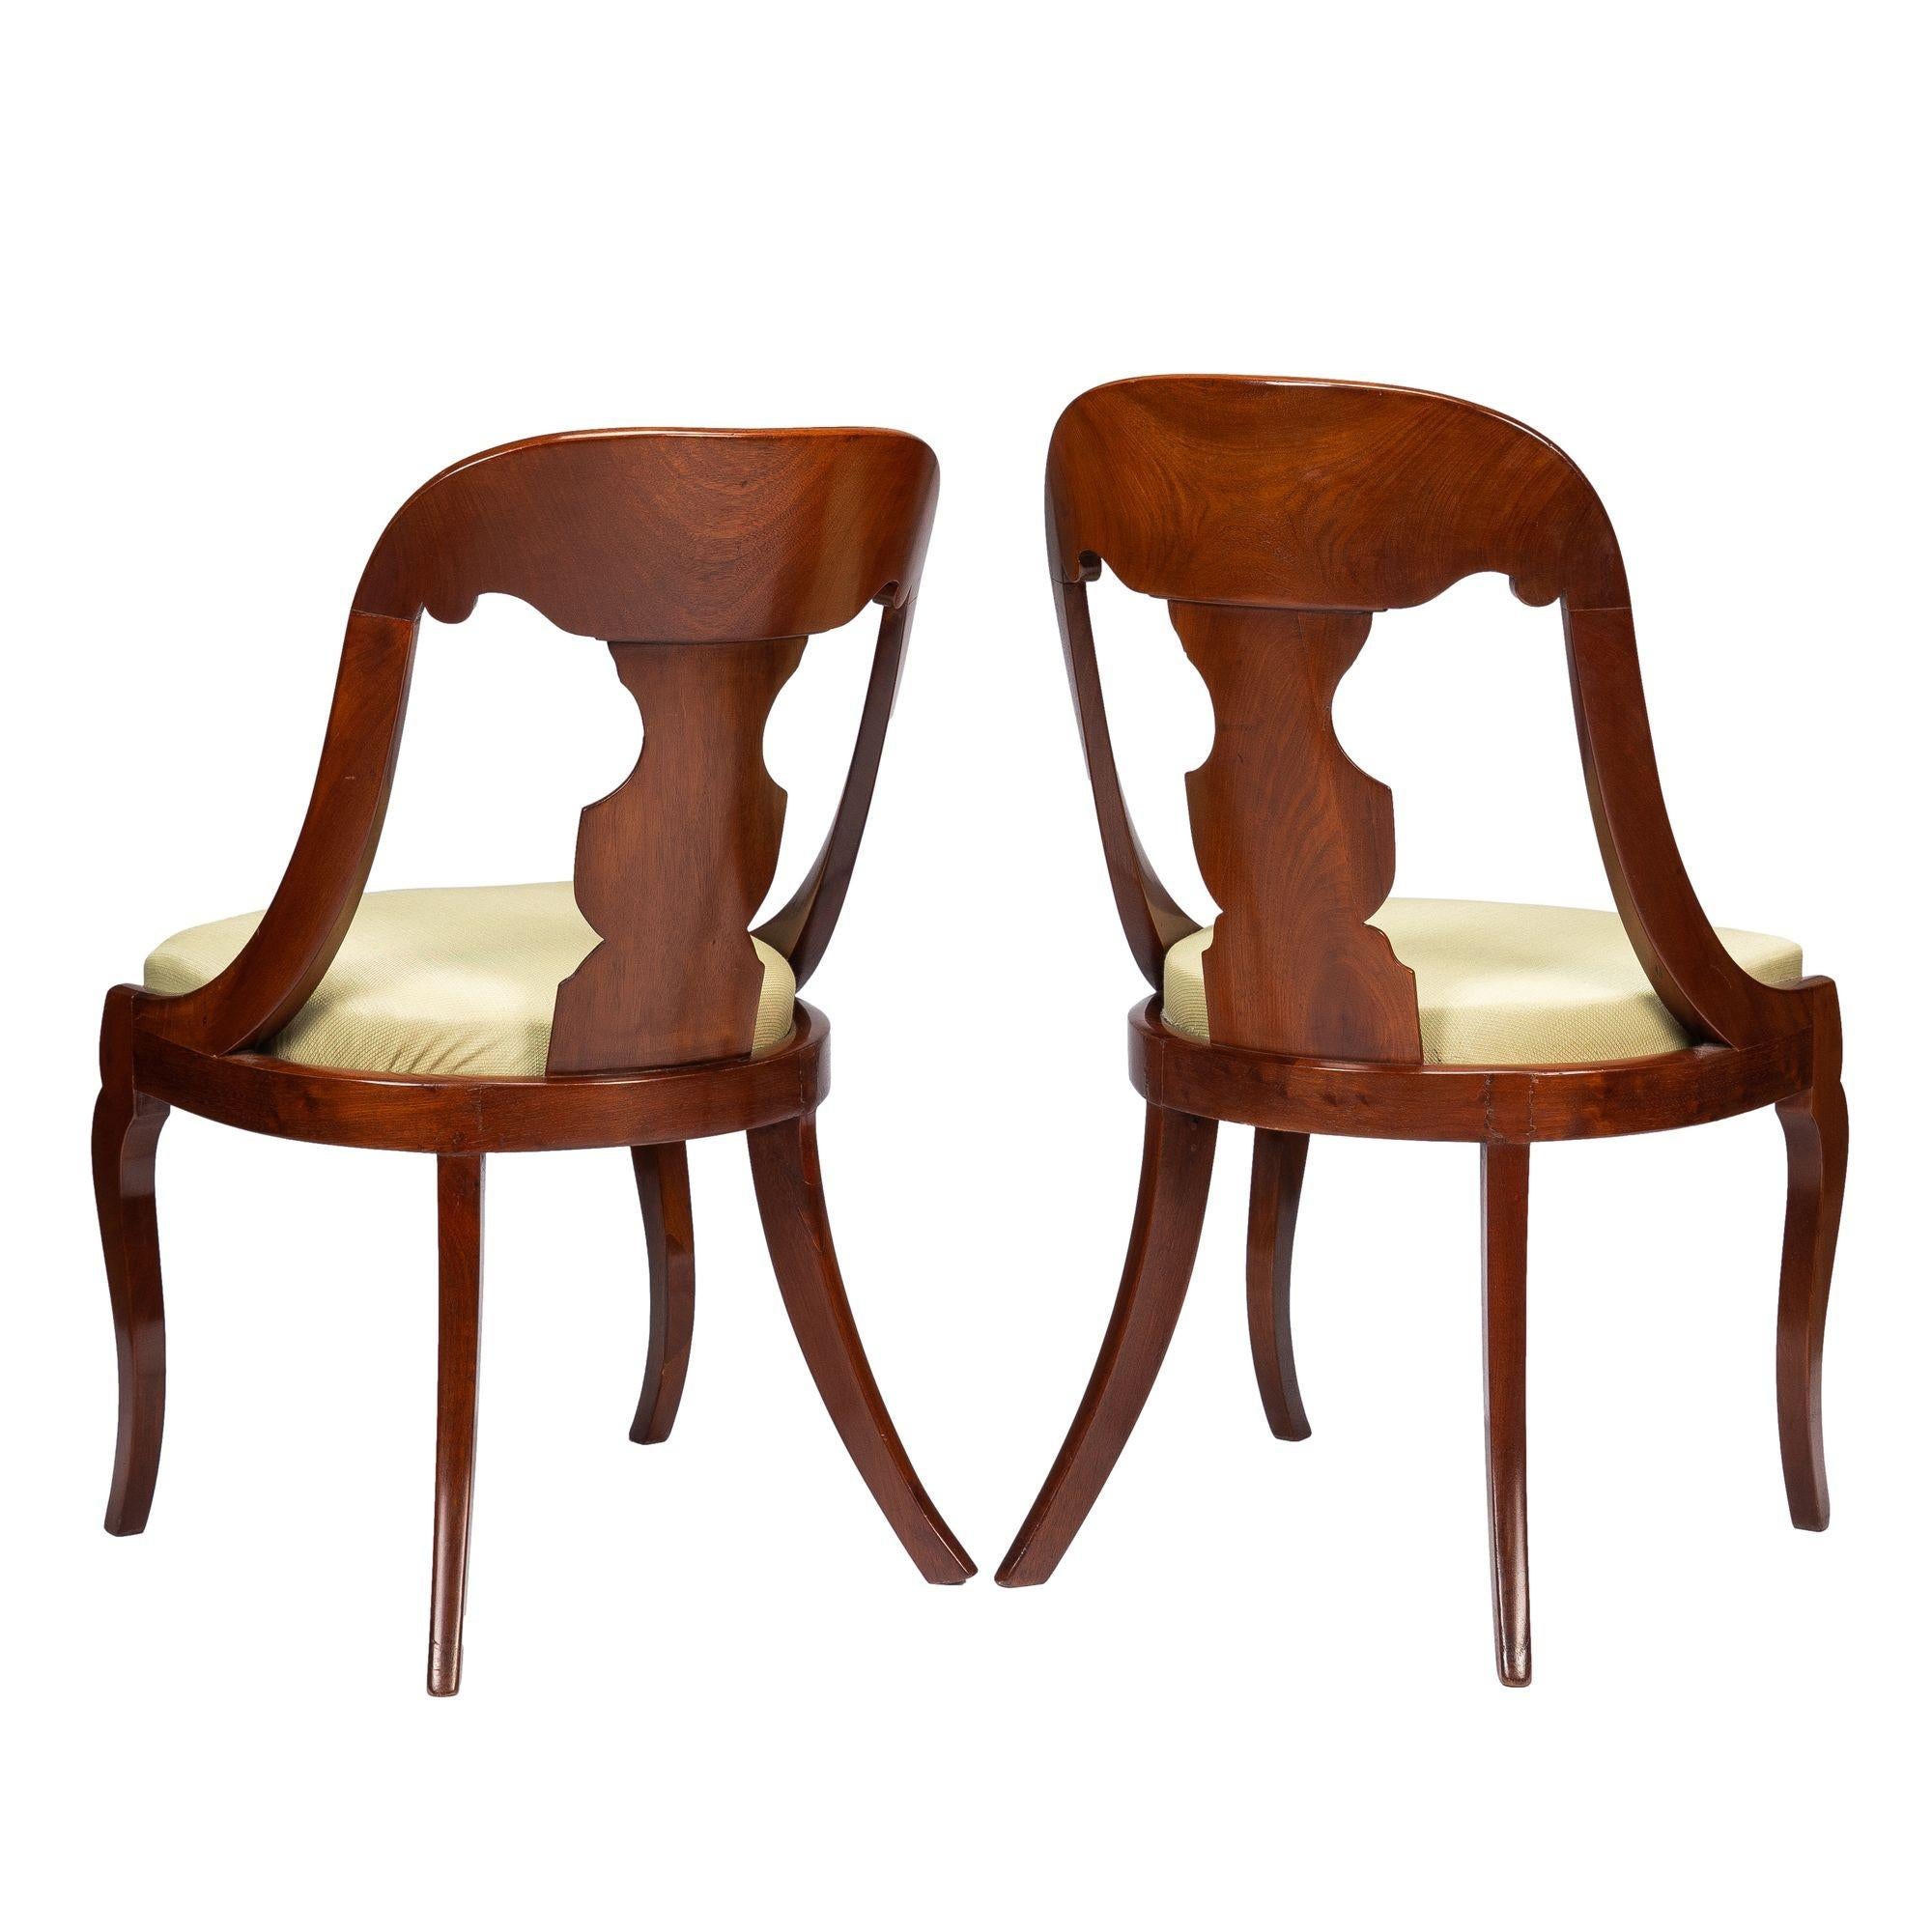 Pair of American Mahogany Gondola Chairs, 1815-35 For Sale 2